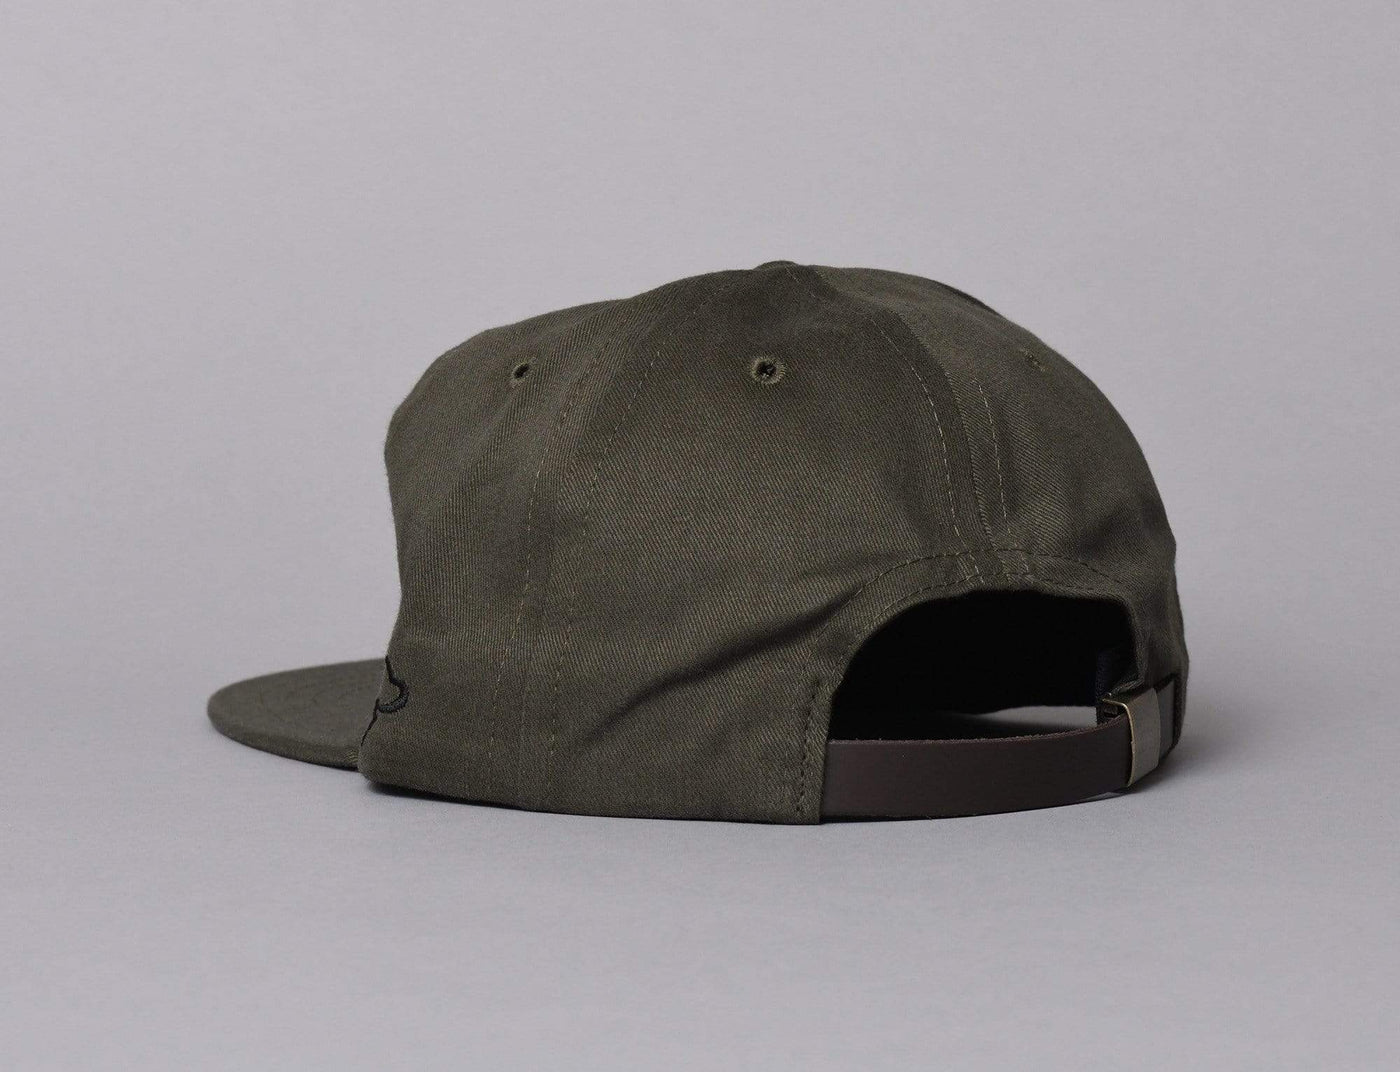 Cap Adjustable The Ampal Creative Dont Think Twice Olive The Ampal Creative Adjustable Cap / Green / One Size